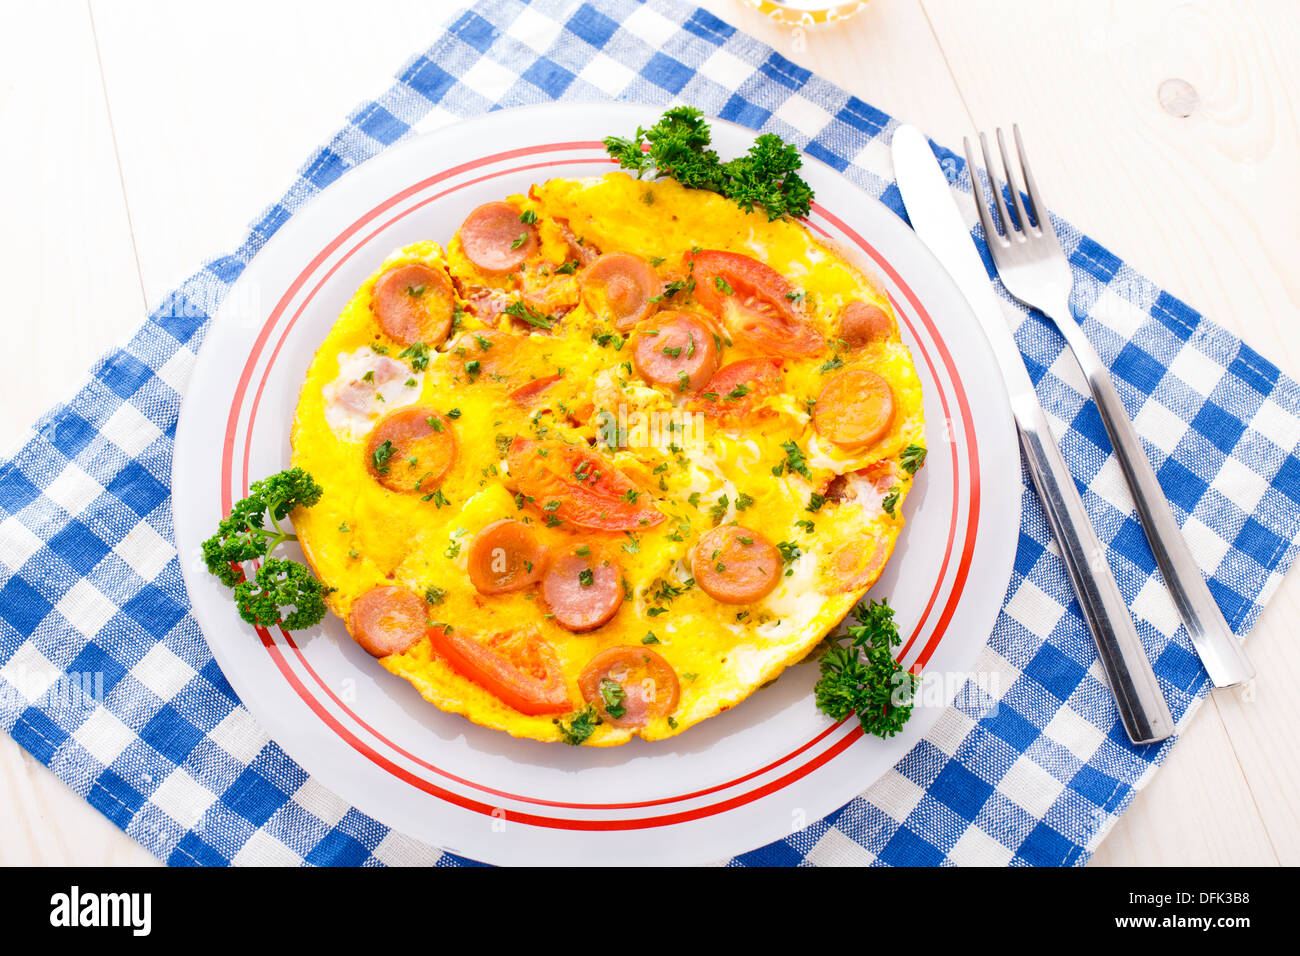 Omelette with slices of sausage and tomato Stock Photo